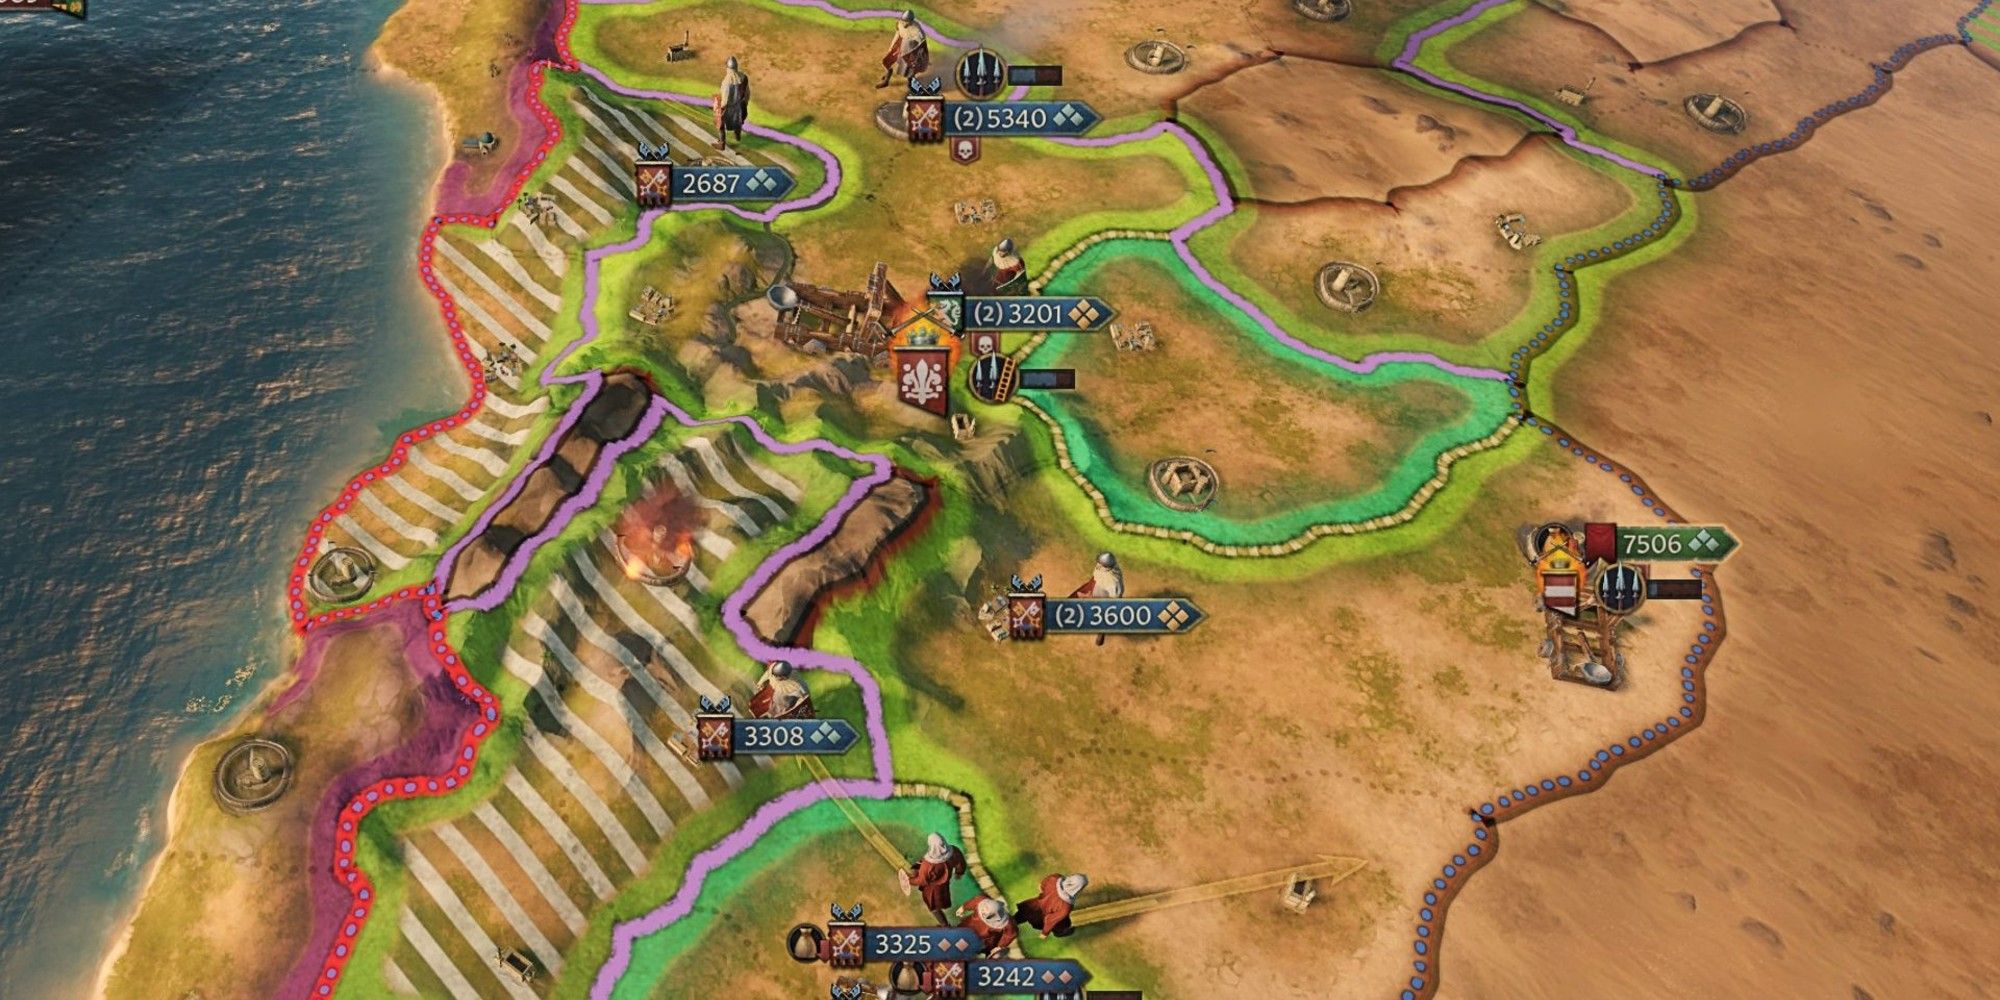 Rally Points with raised armies on the map in Crusader Kings 3